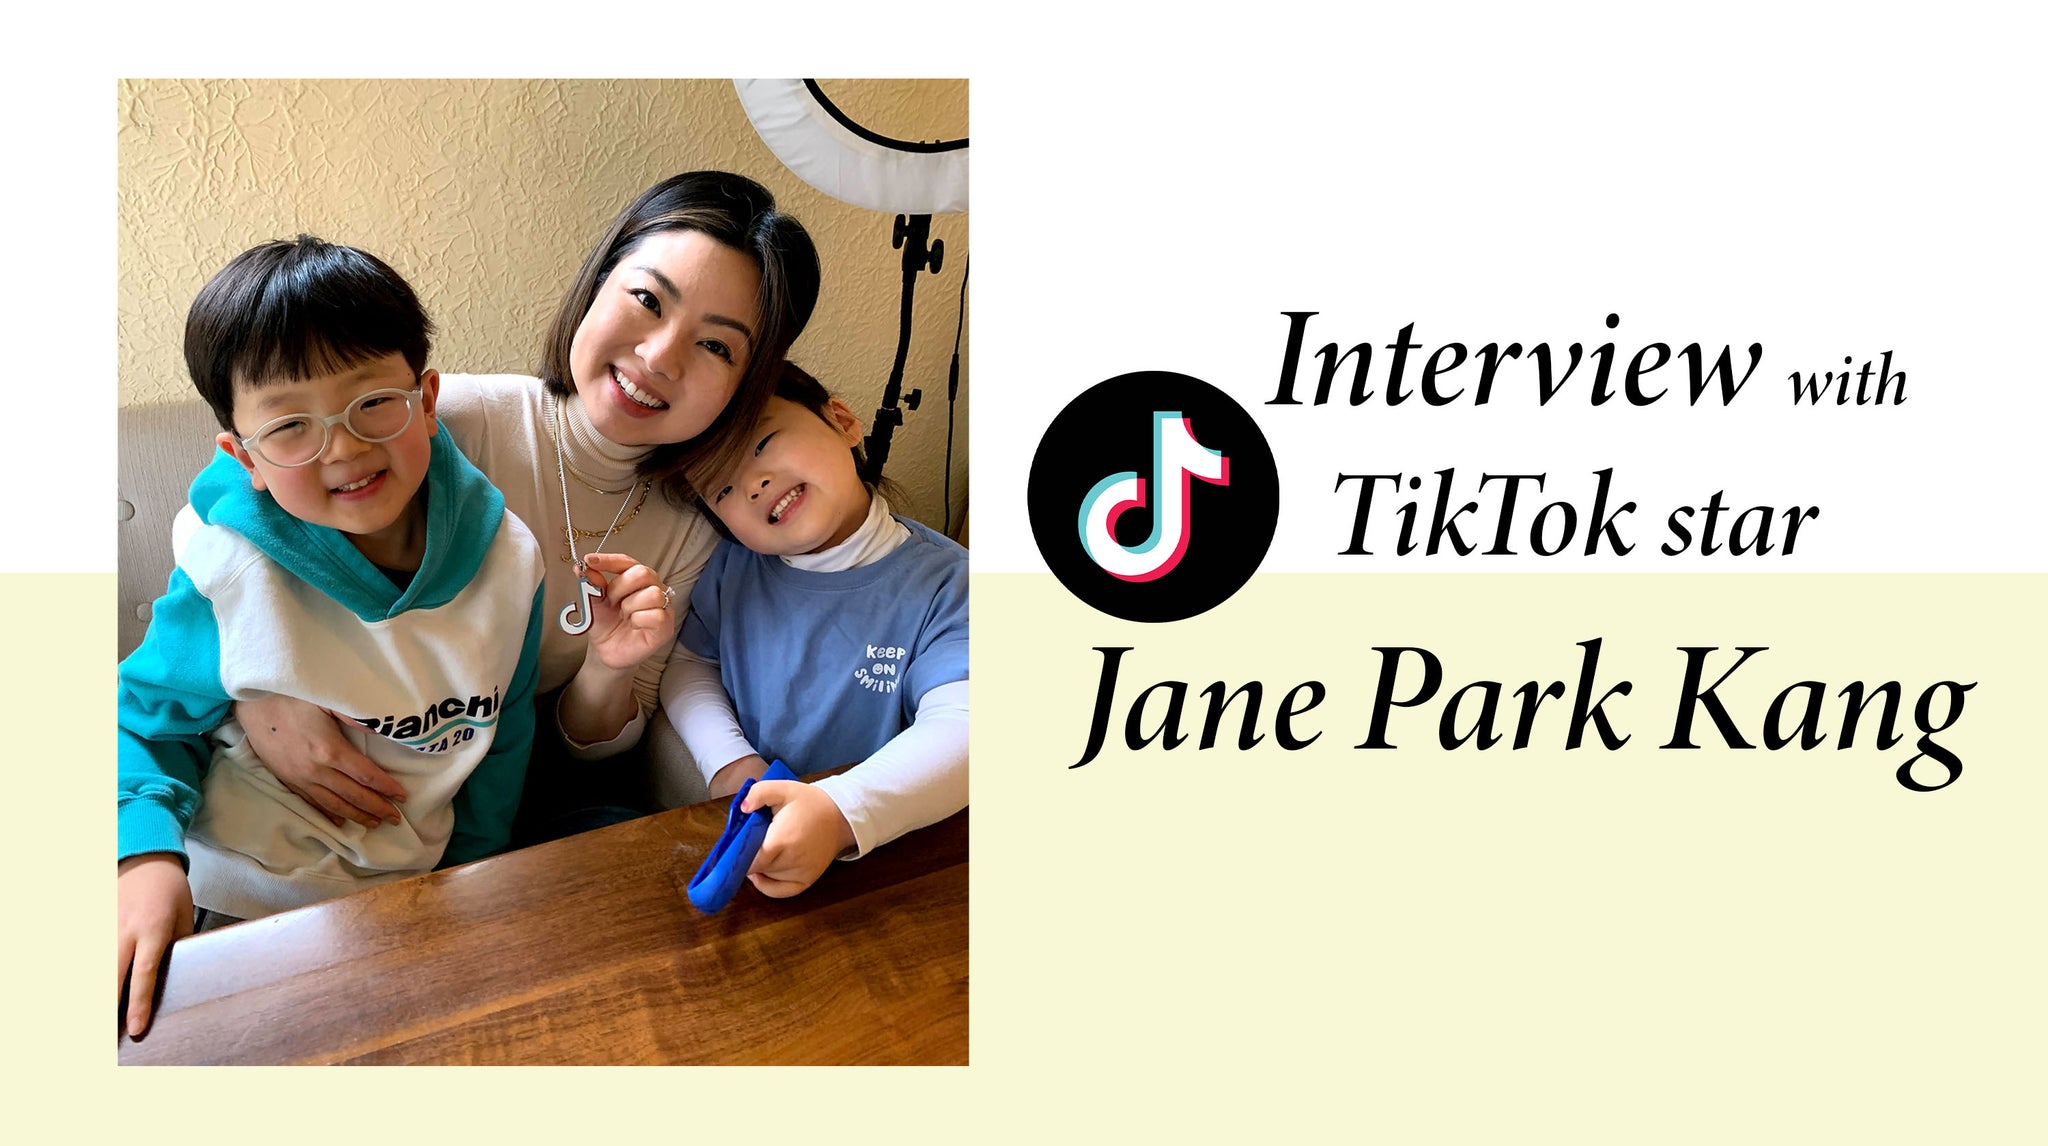 Exclusive Interview with TikTok star Jane Park Kang